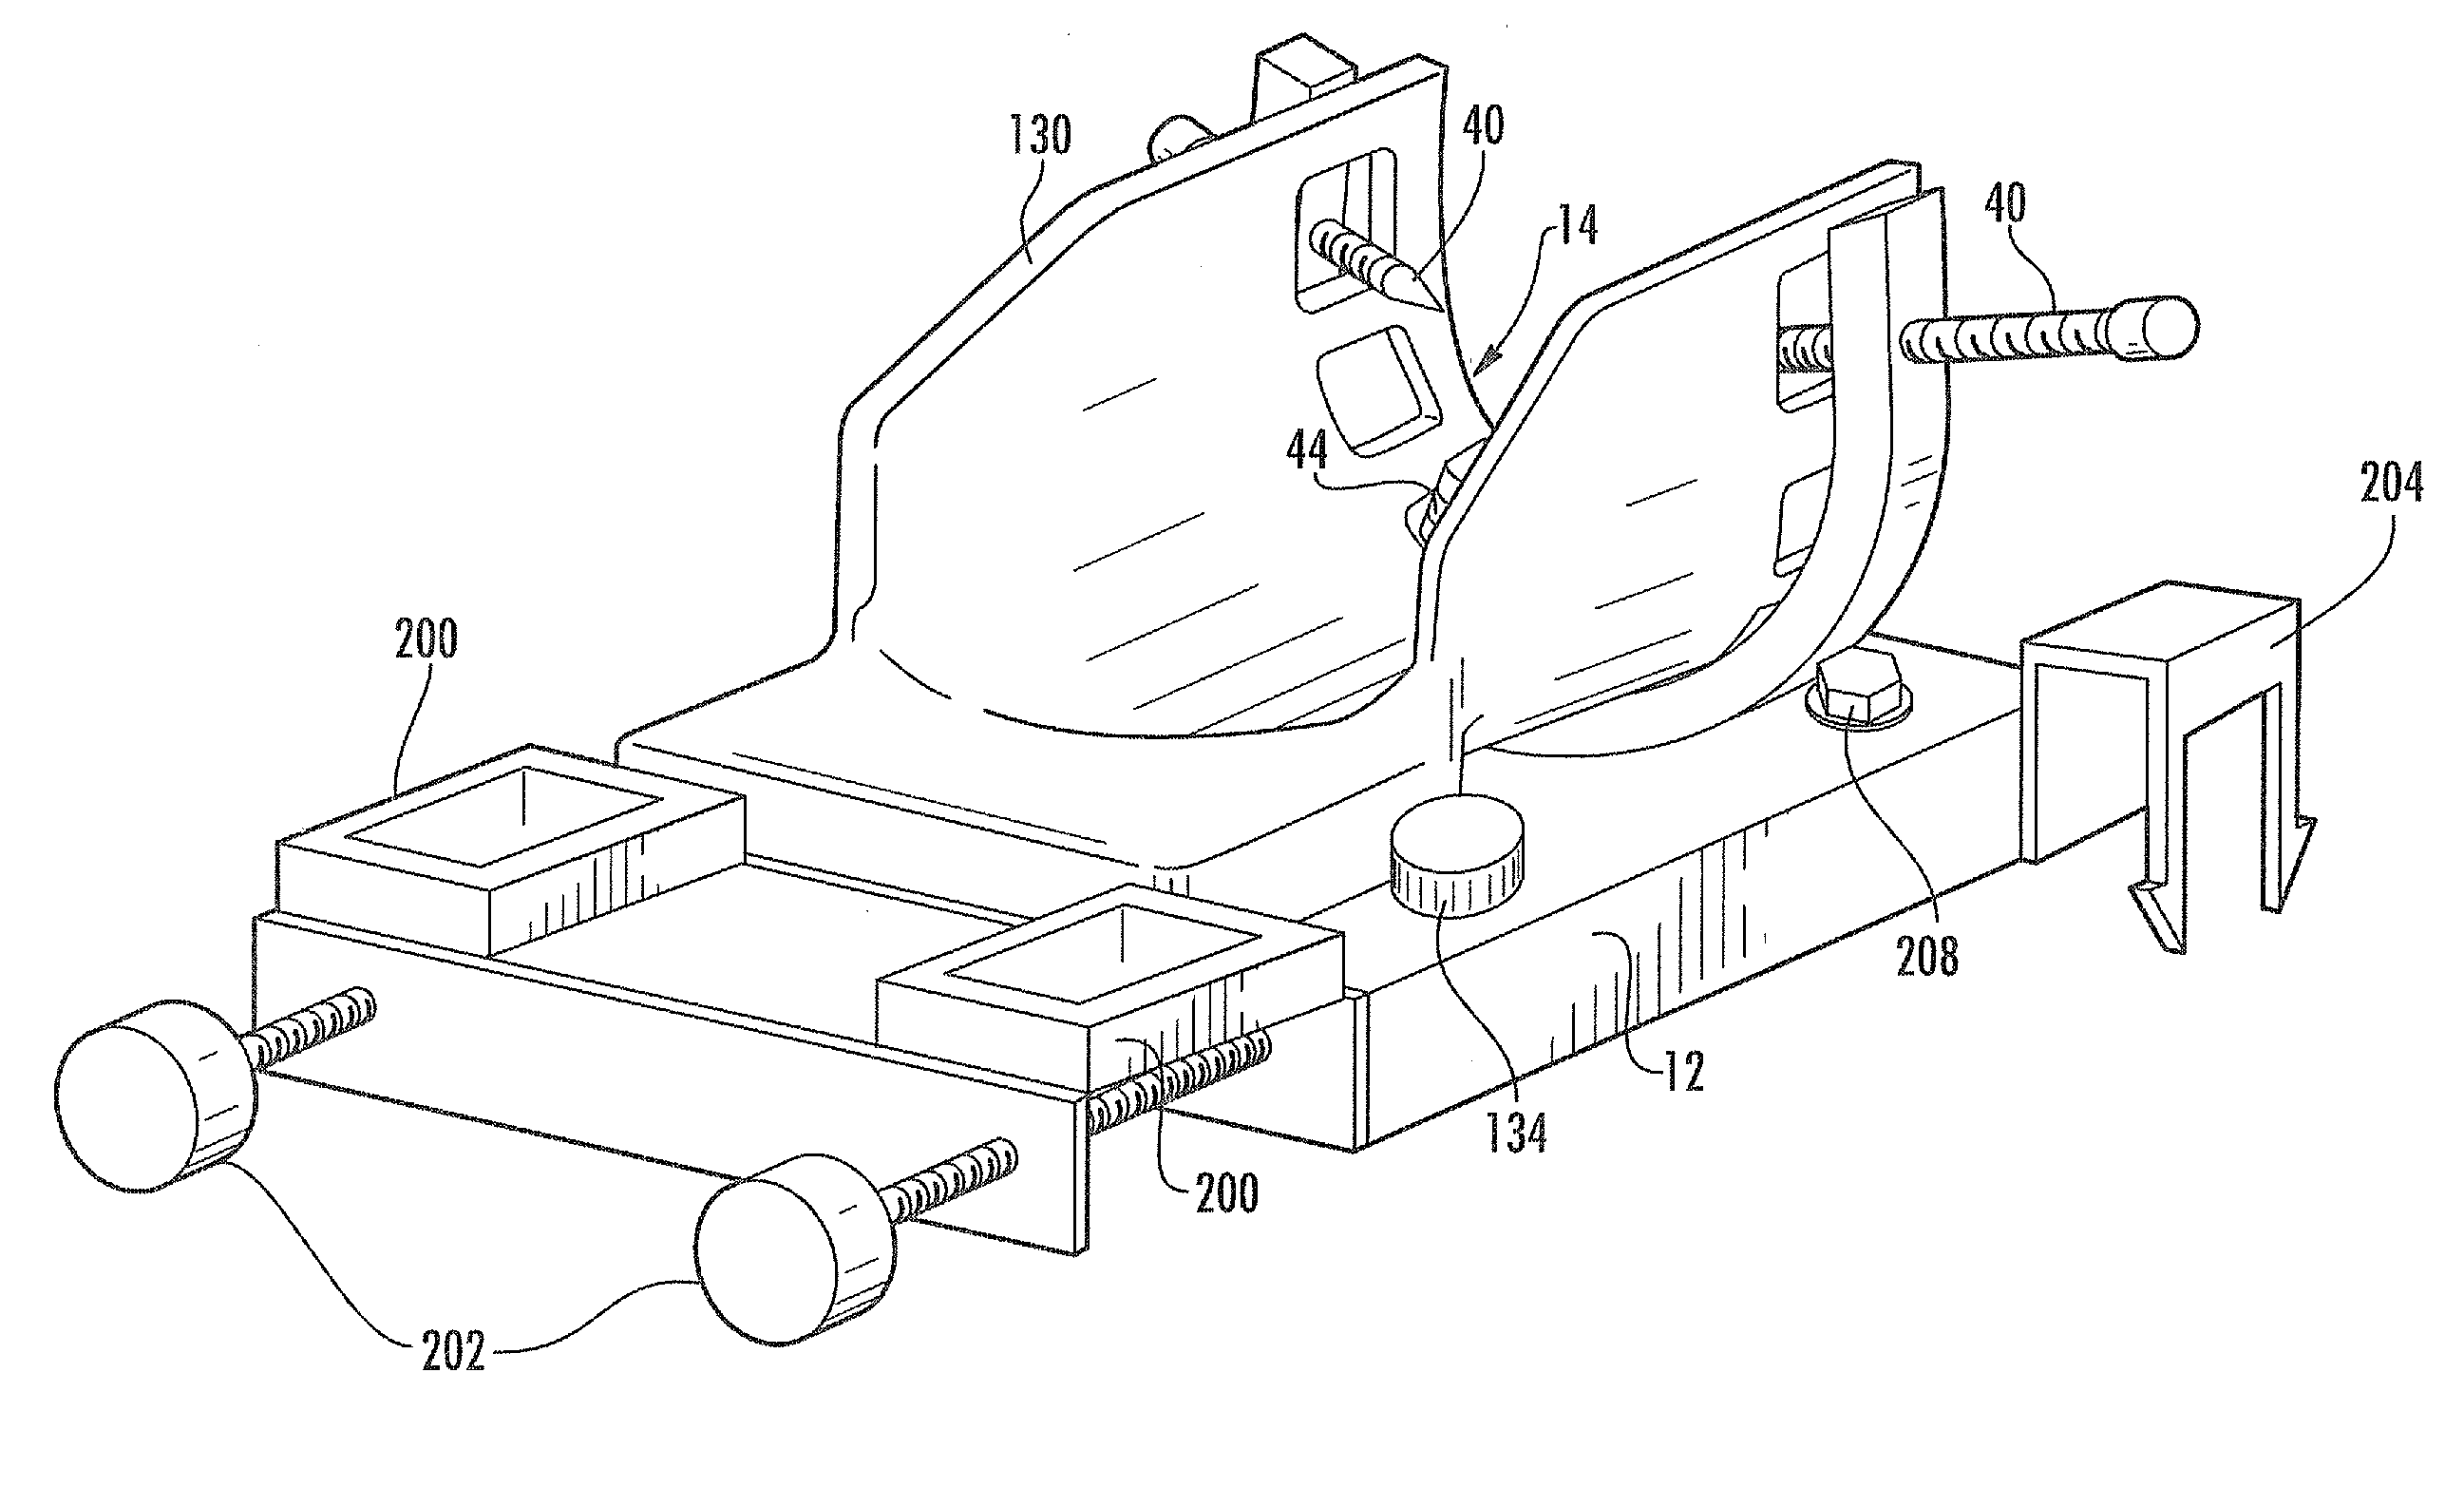 Mri-compatible head fixation frame with cooperating head coil apparatus